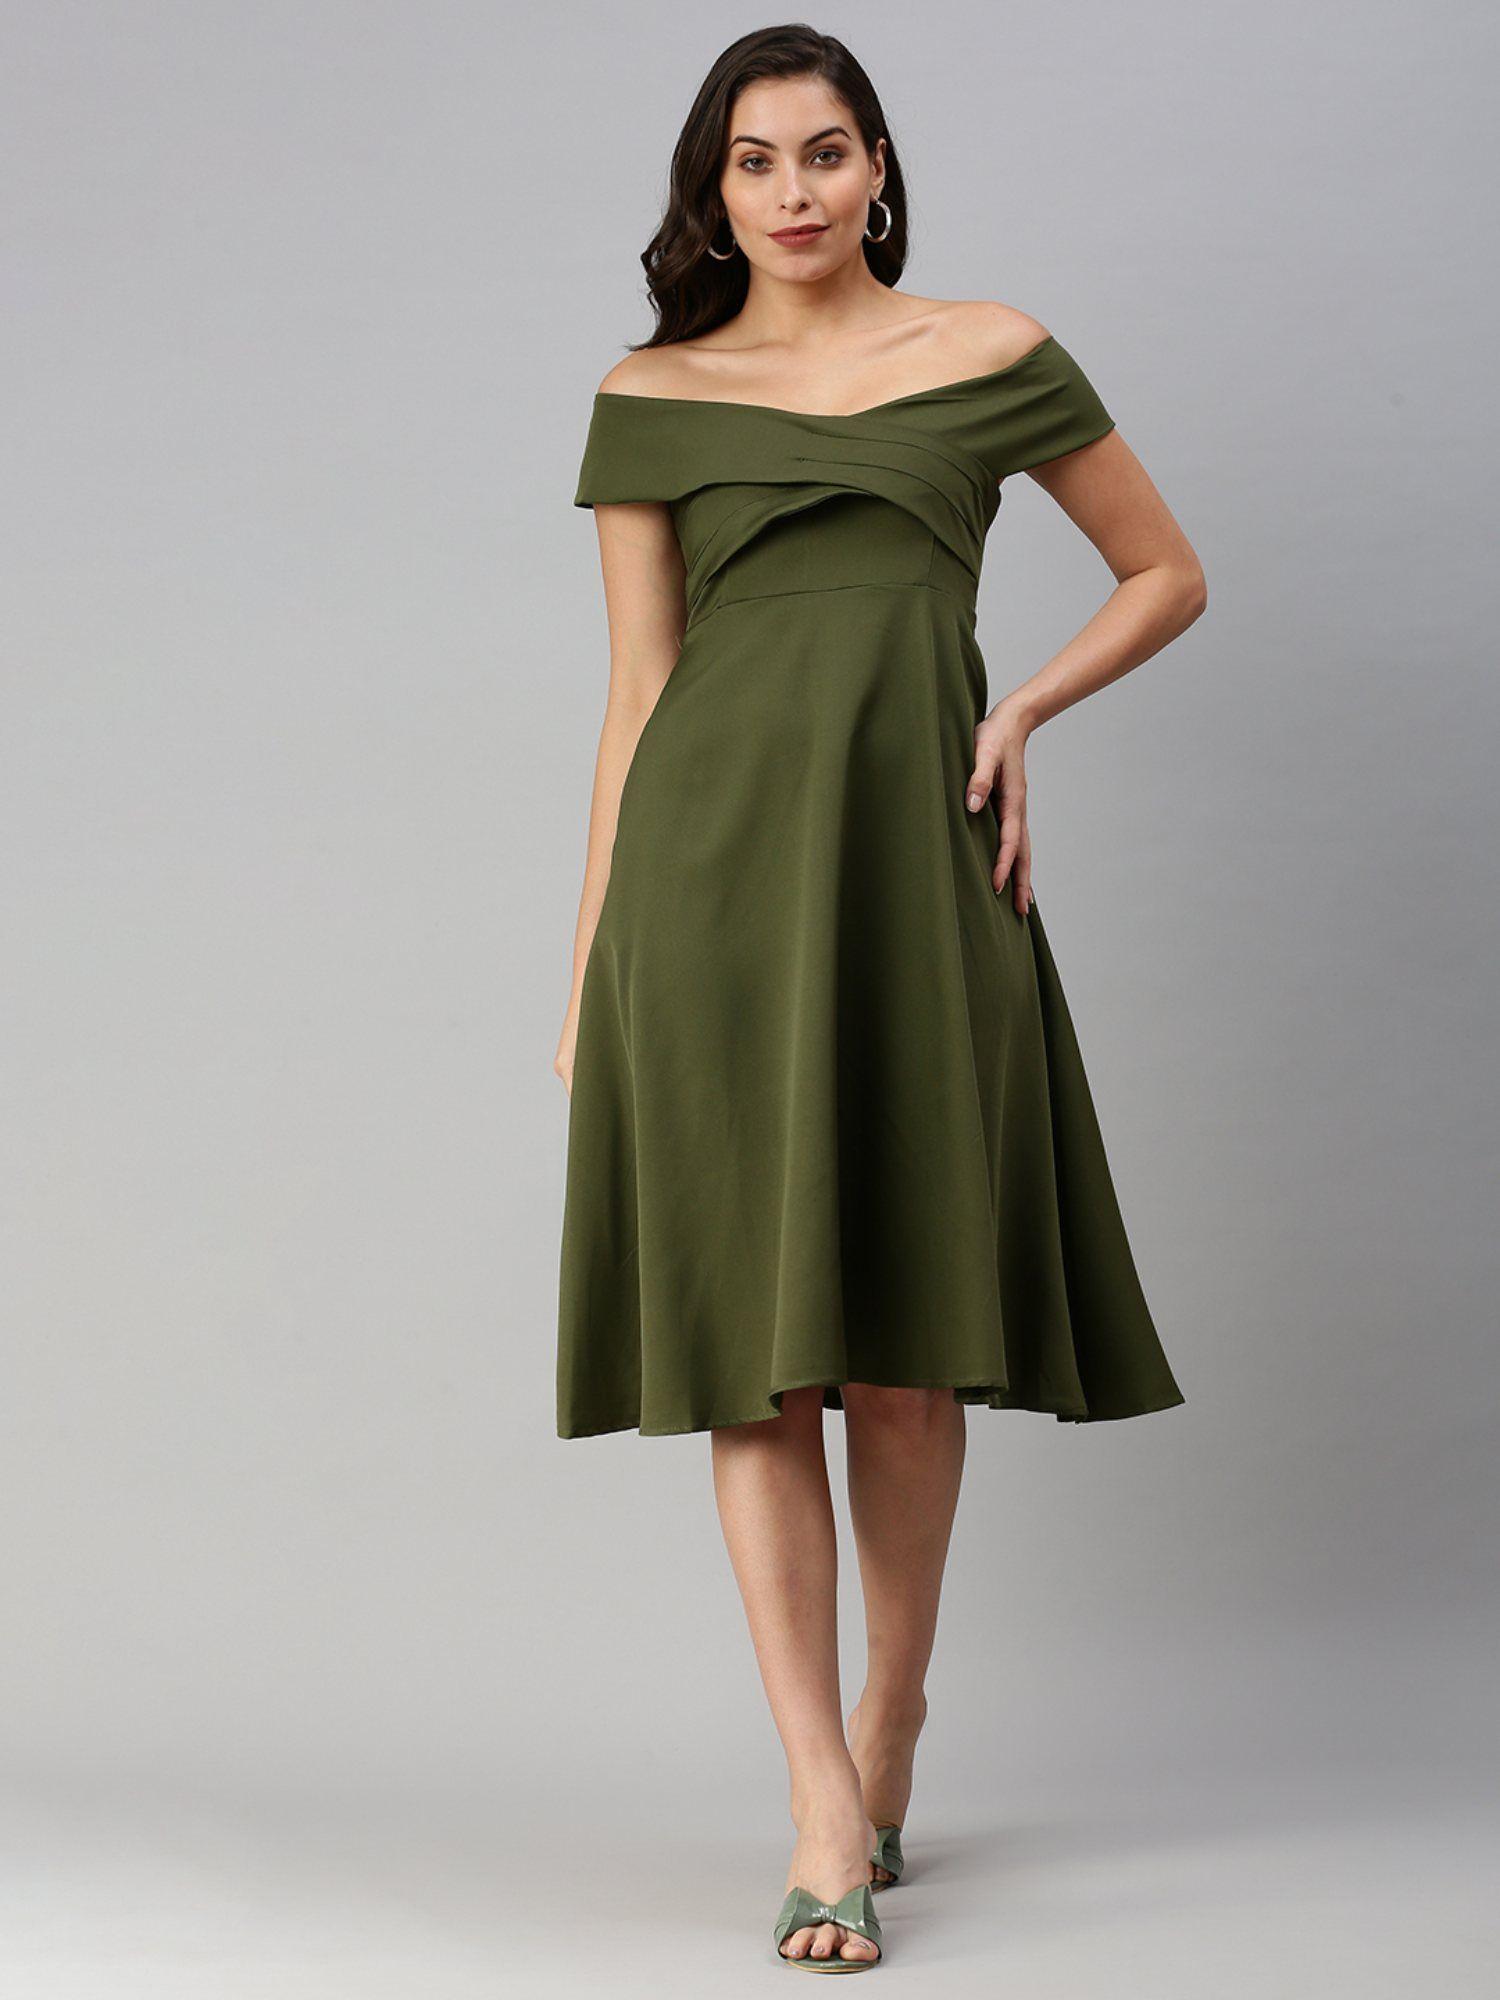 women's solid olive fit and flare dress